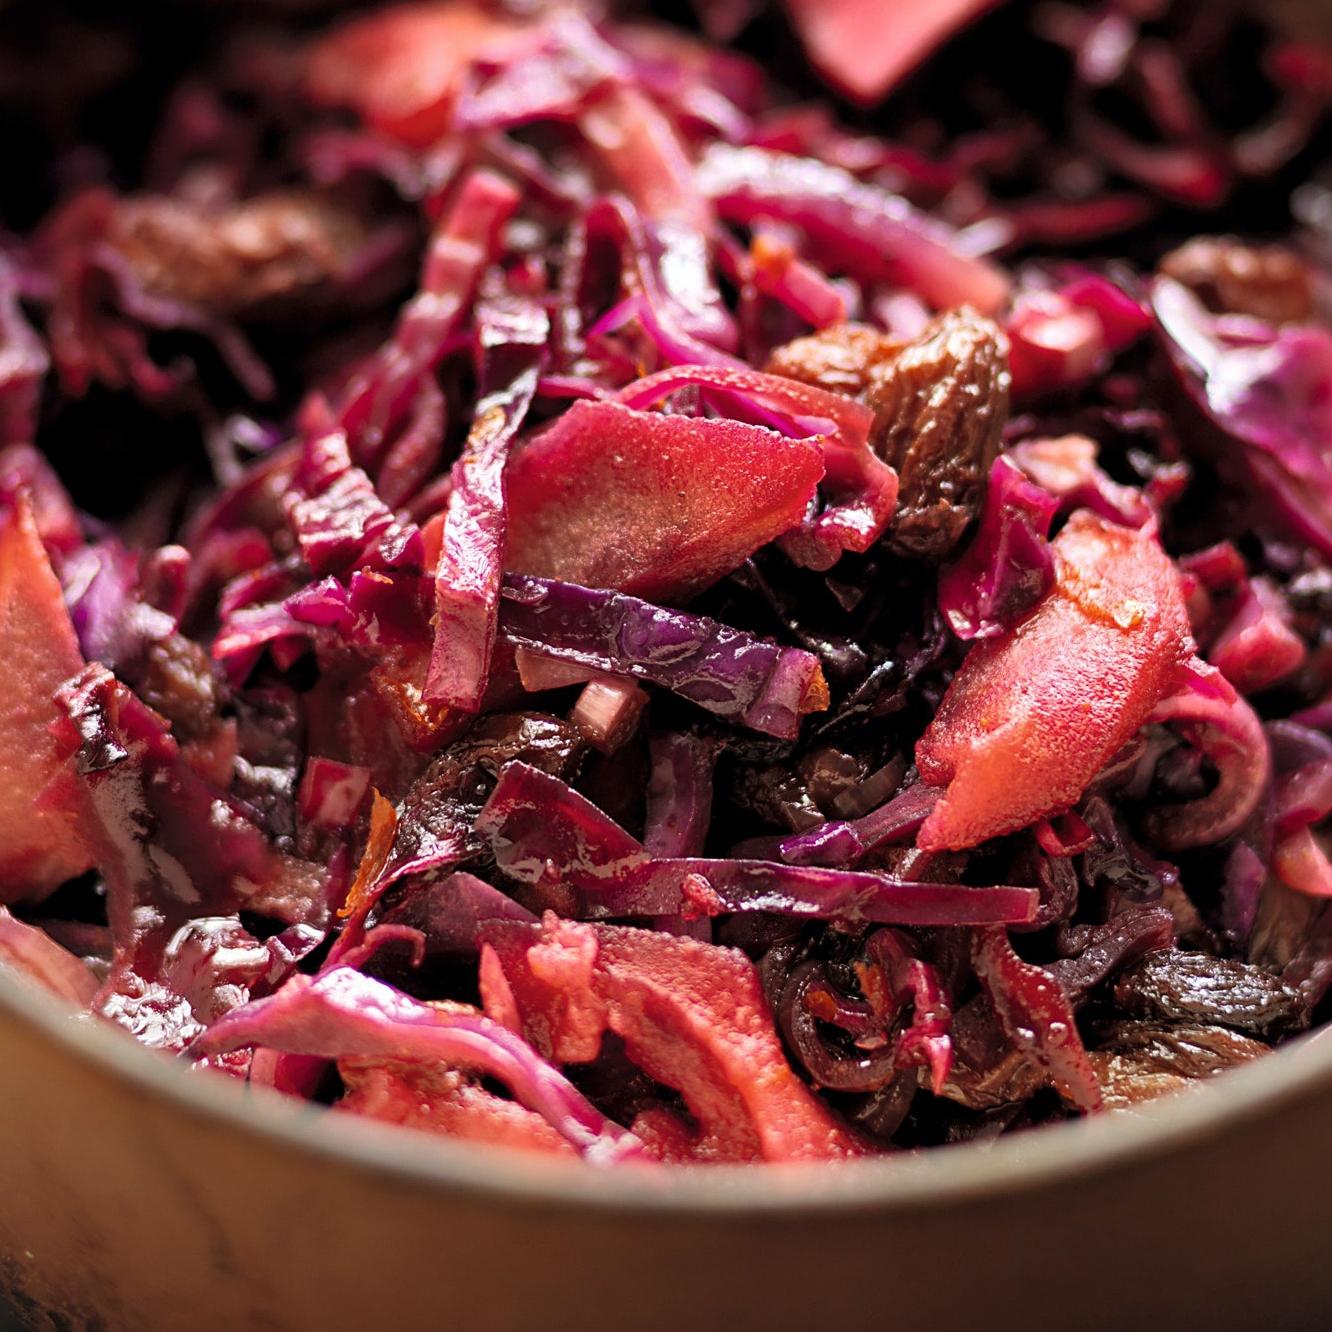  Vibrant red cabbage pickled in a tangy mix of vinegar and spices.